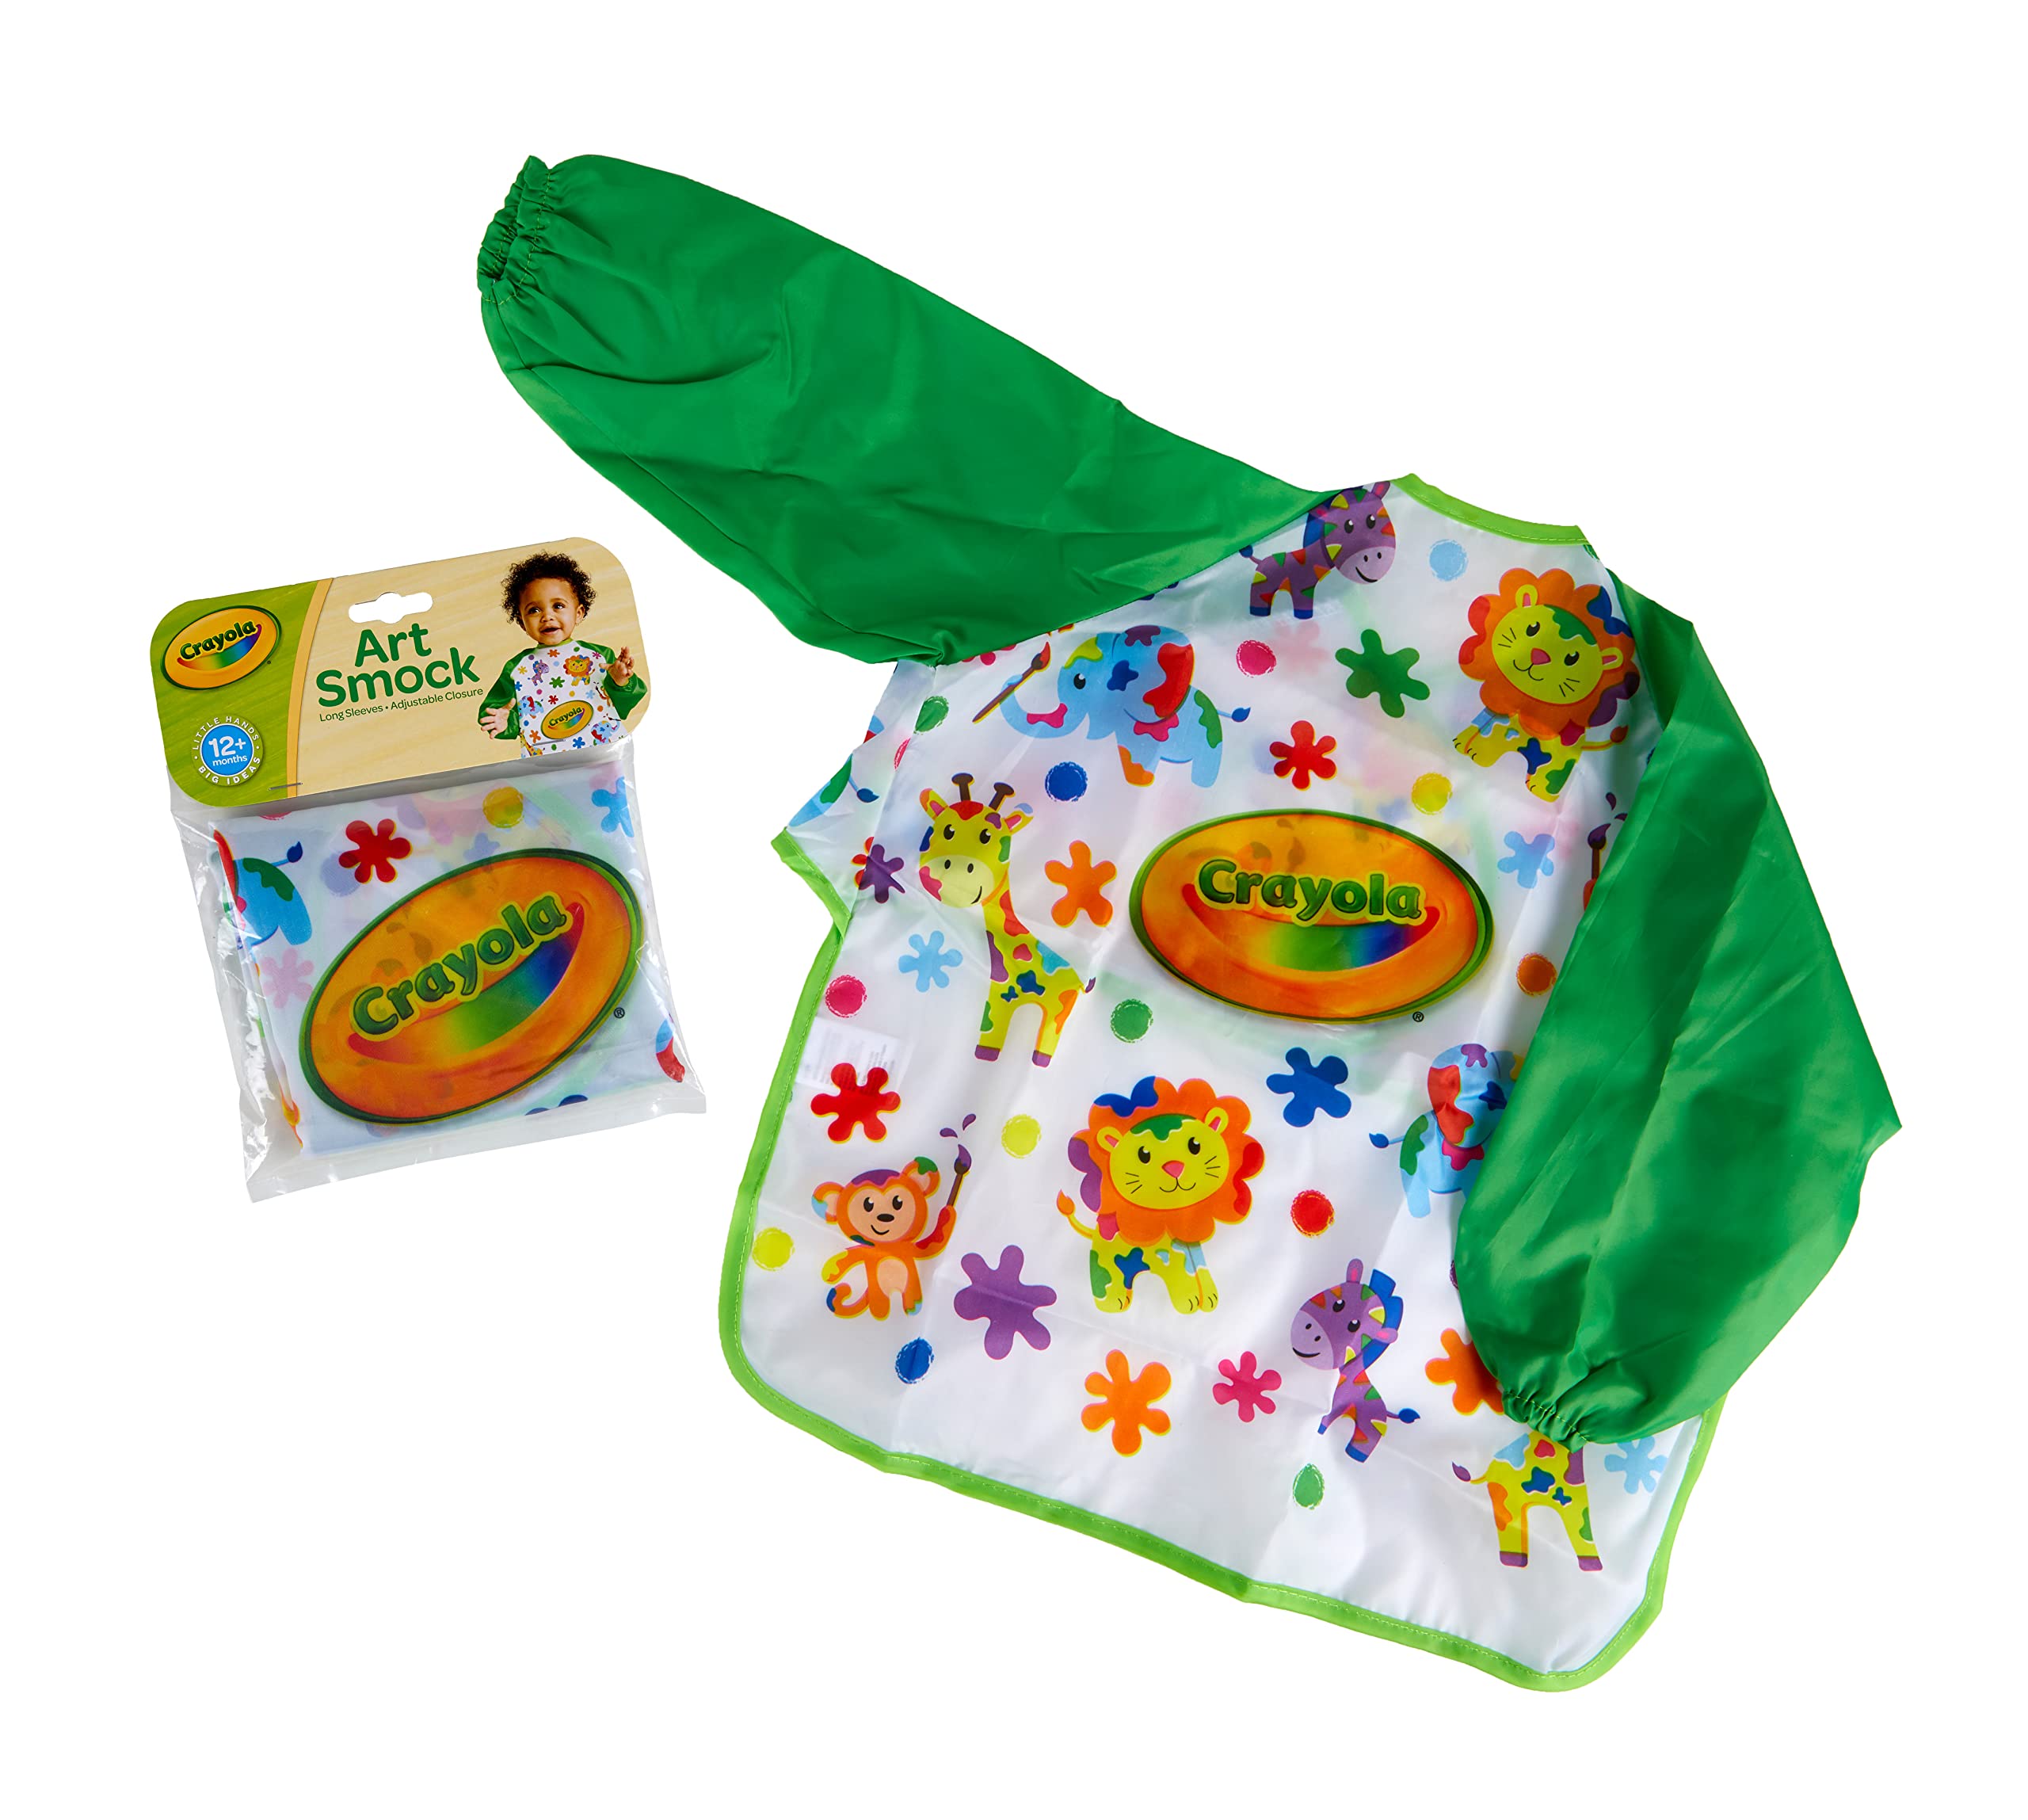 Book Cover Crayola Art Smock for Toddlers, Small Waterproof Bib, Best Fit for Age 1 (12 Months), 1 x 7-1/5 x 8-1/10 In